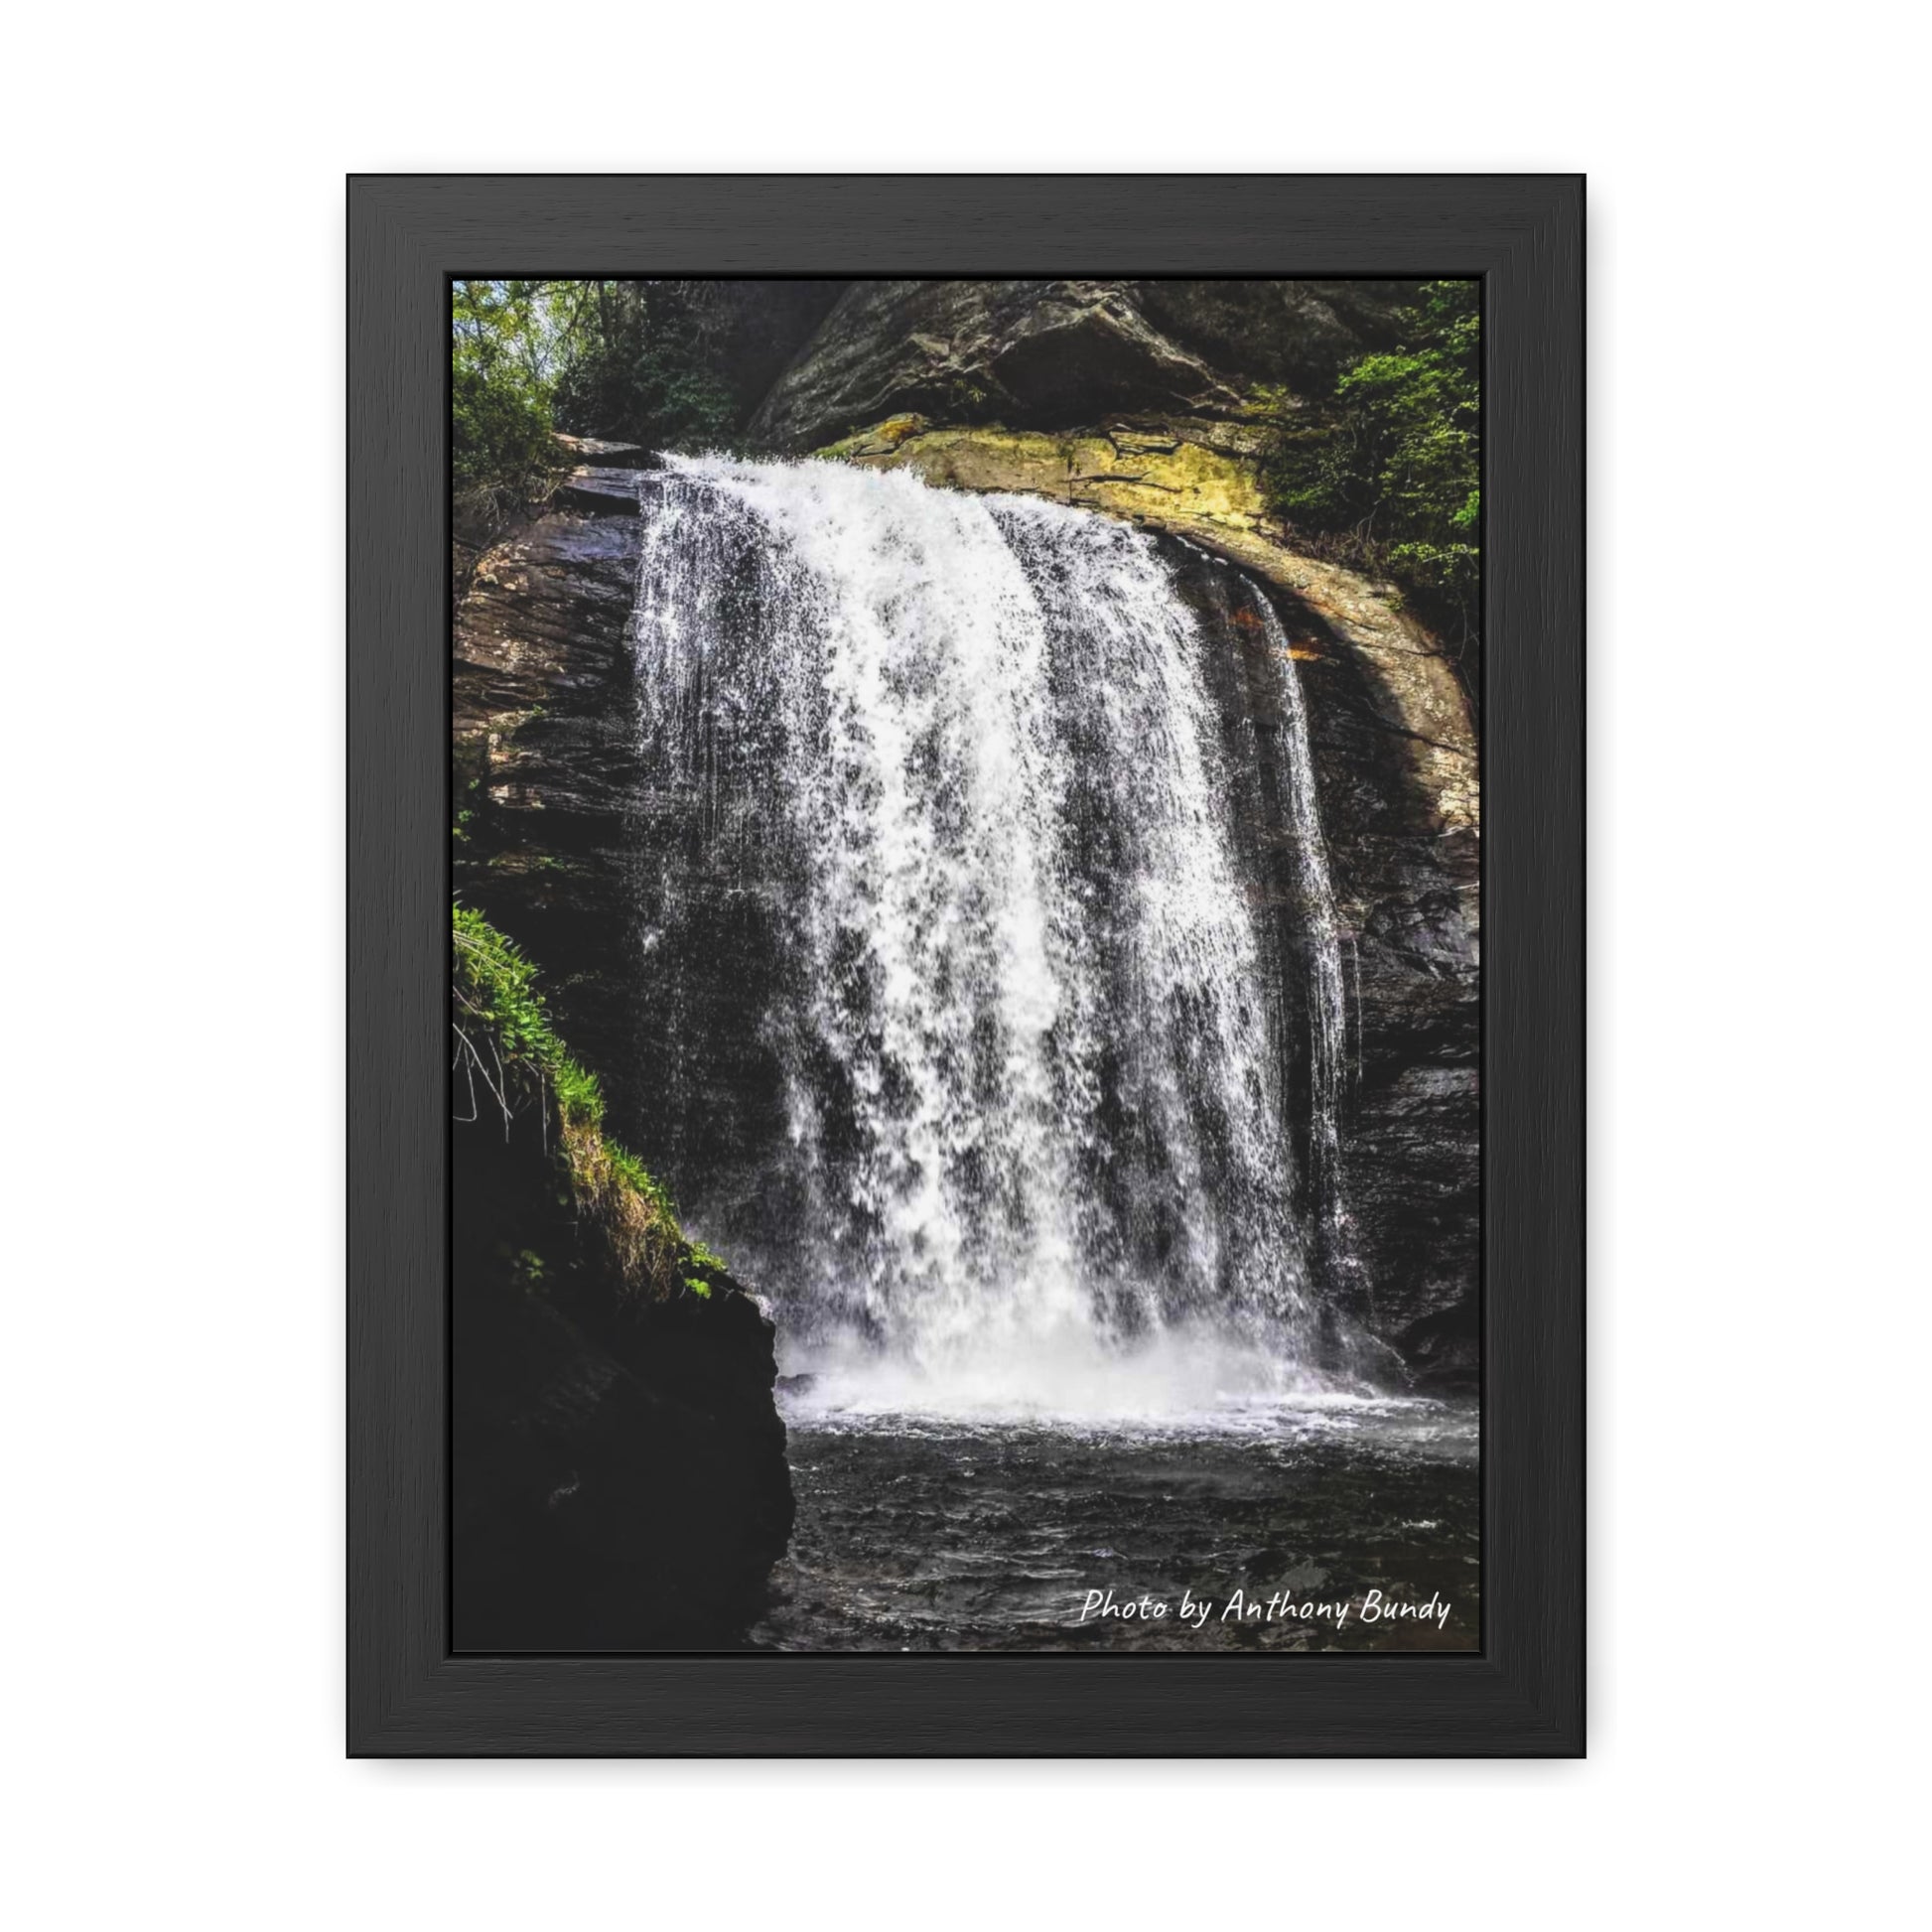 Framed Poster of Waterfall in Asheville, NC, front view.